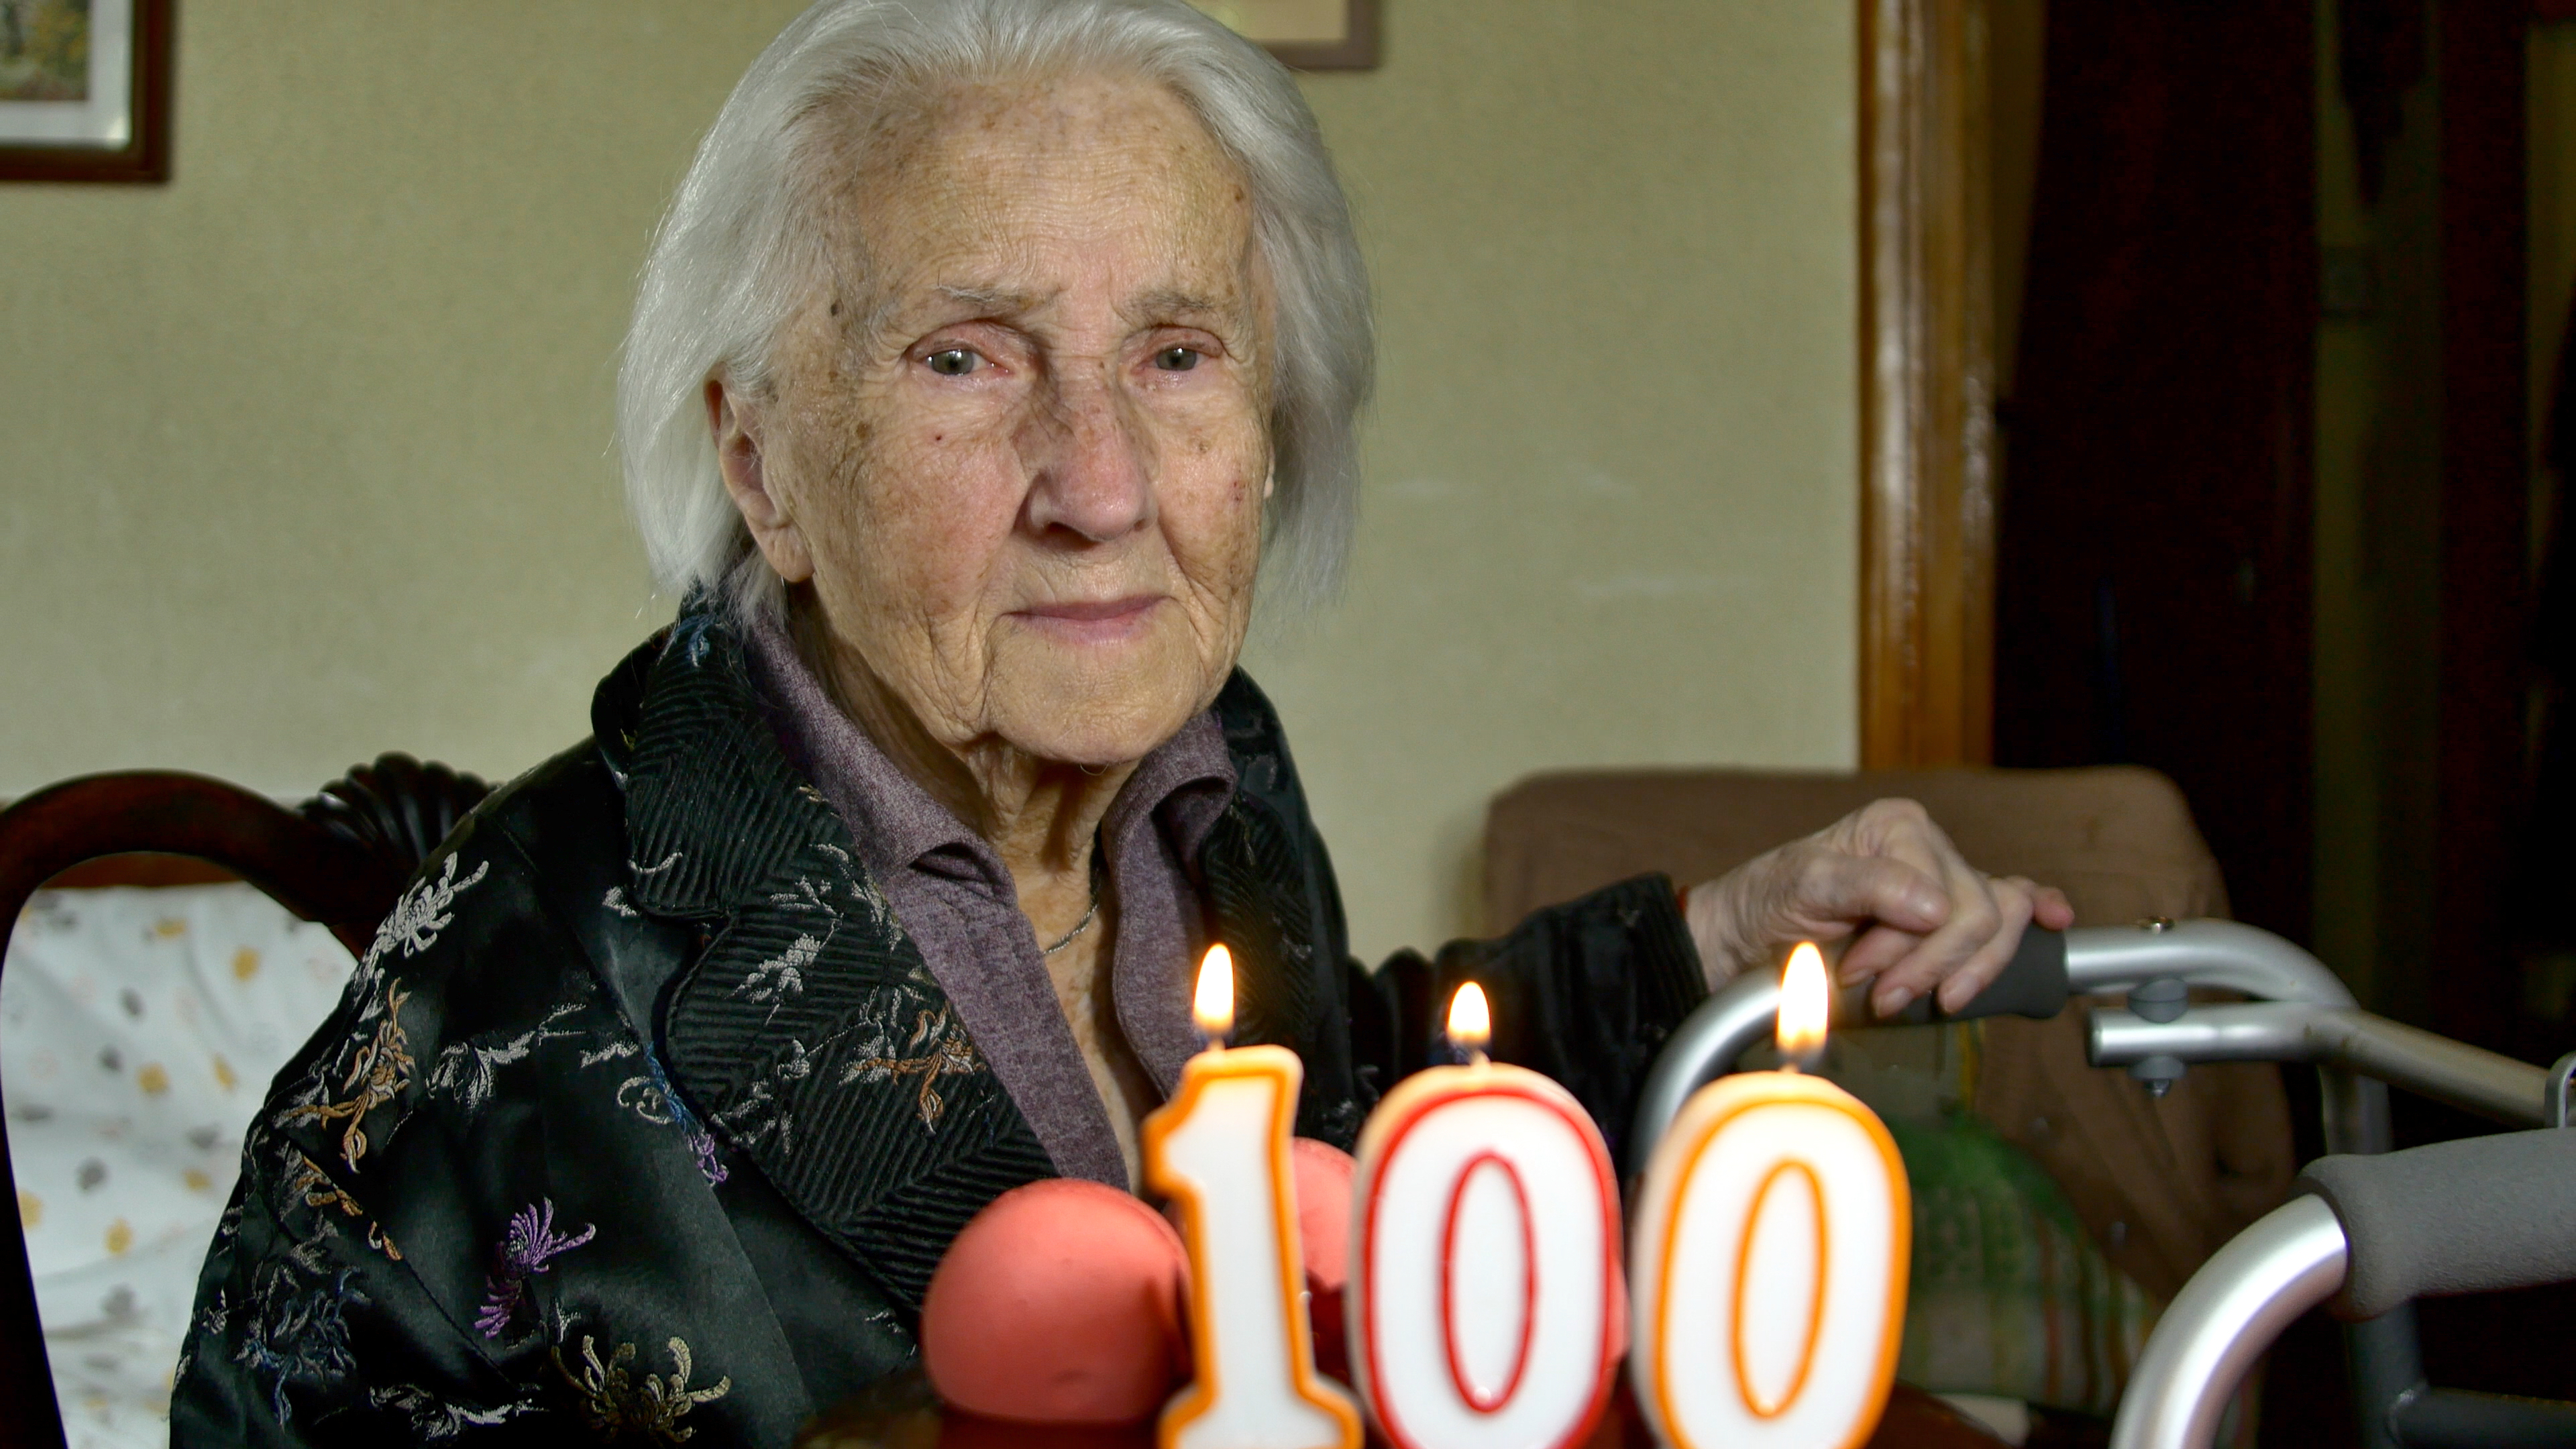 100 years old